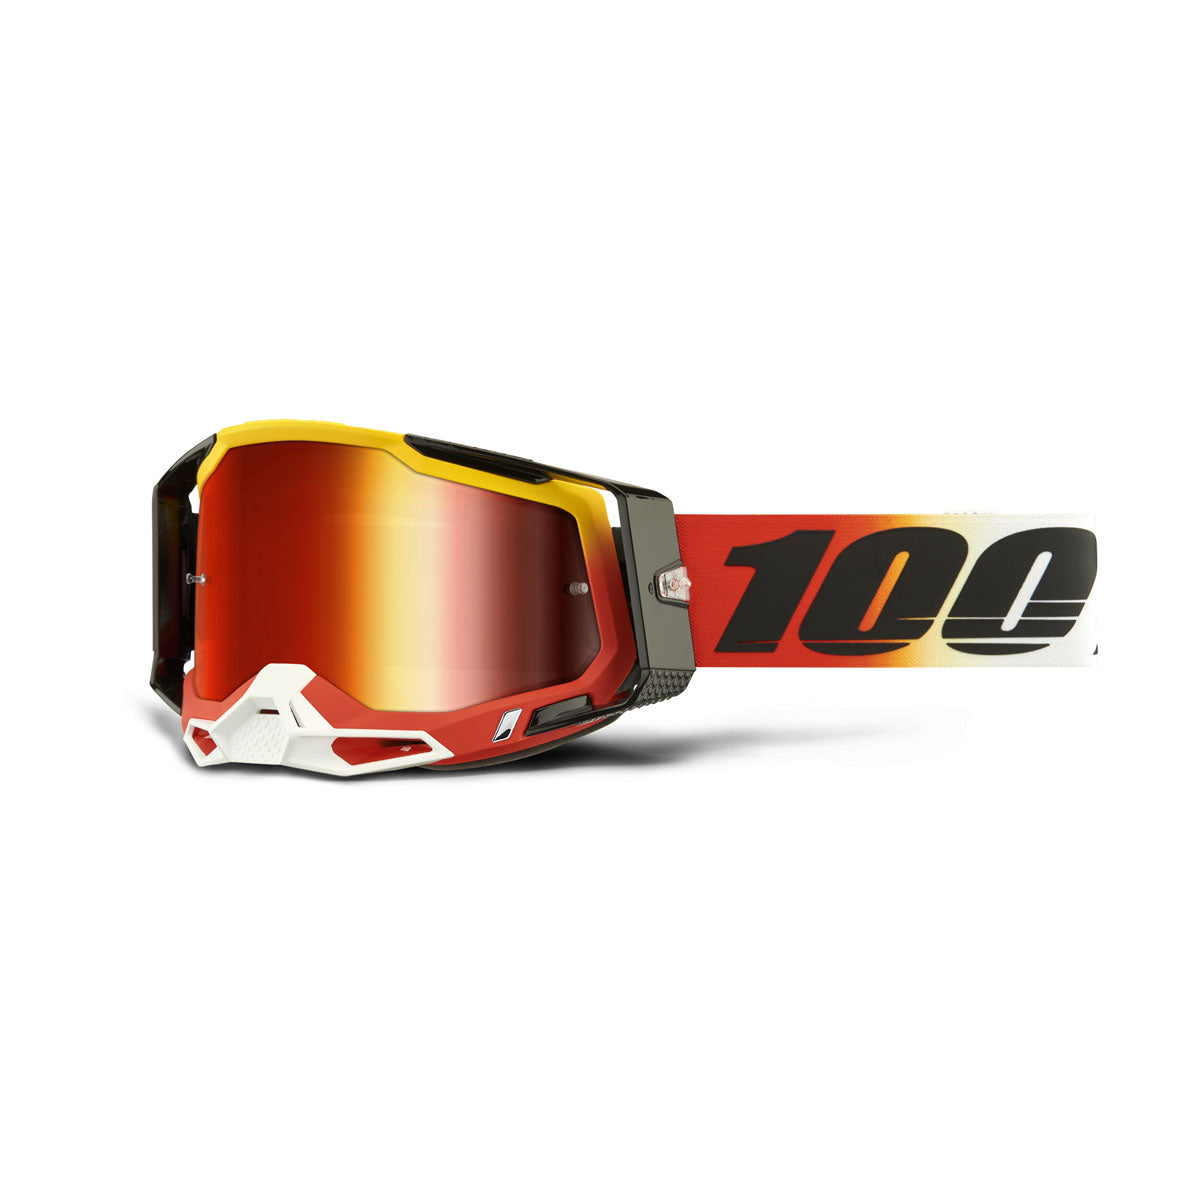 100% Racecraft 2 Goggles Ogusto / Mirror Red Lens